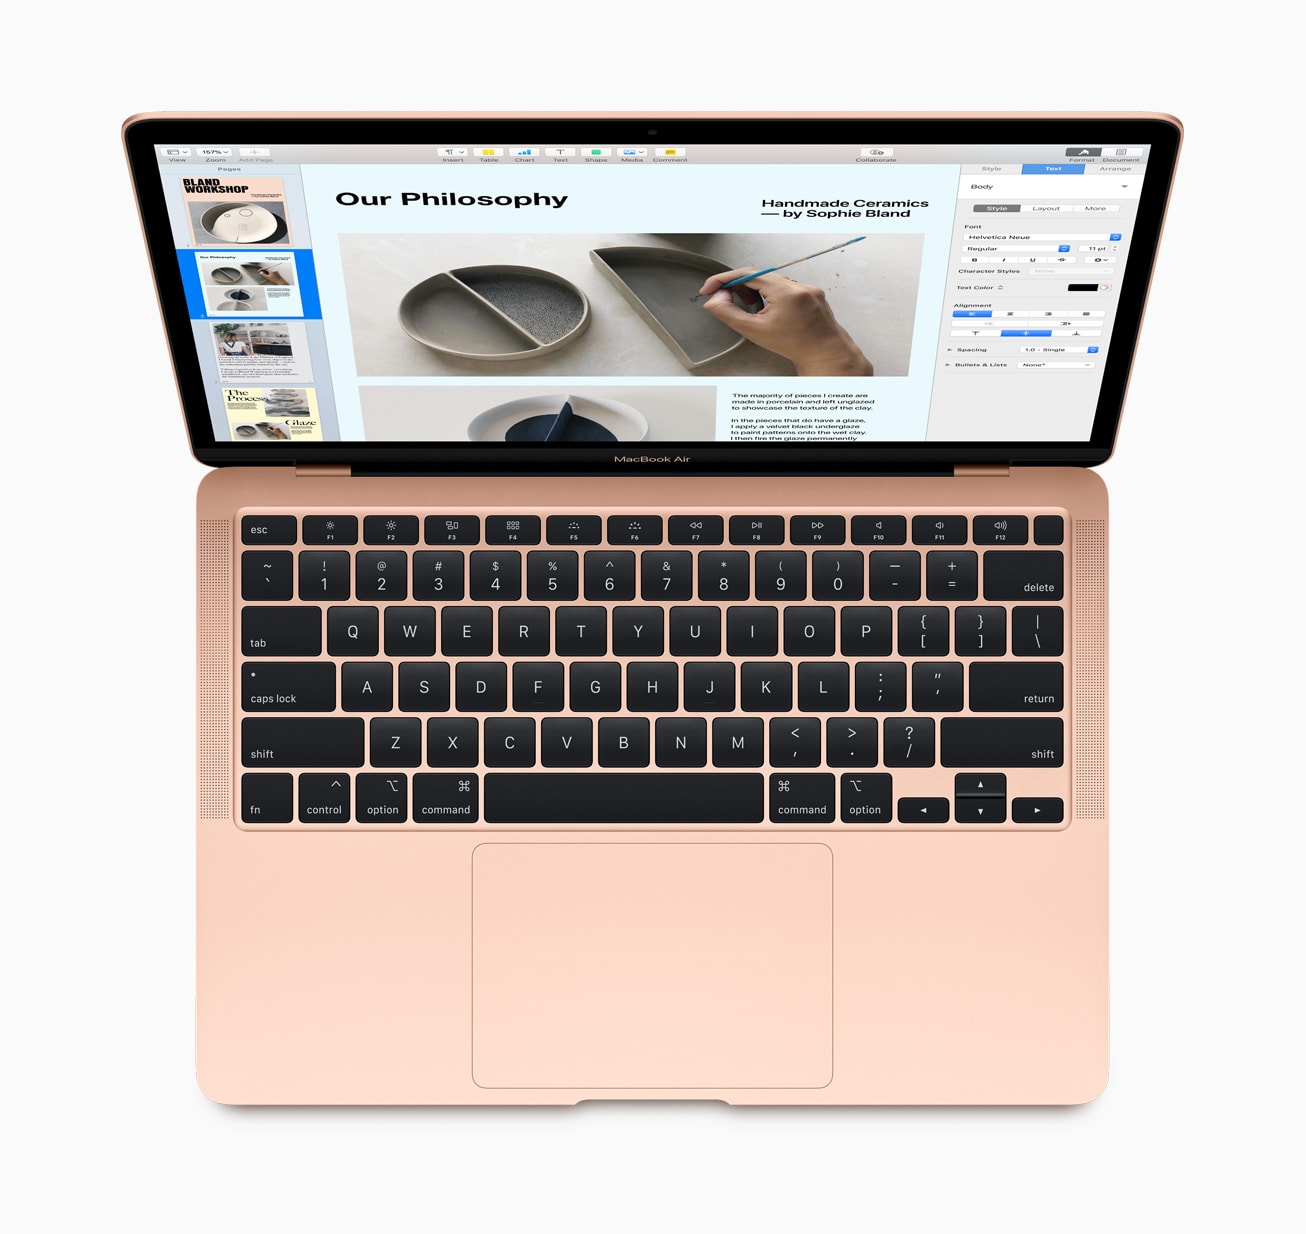 The new MacBook Air comes in three finishes — gold, silver and space gray